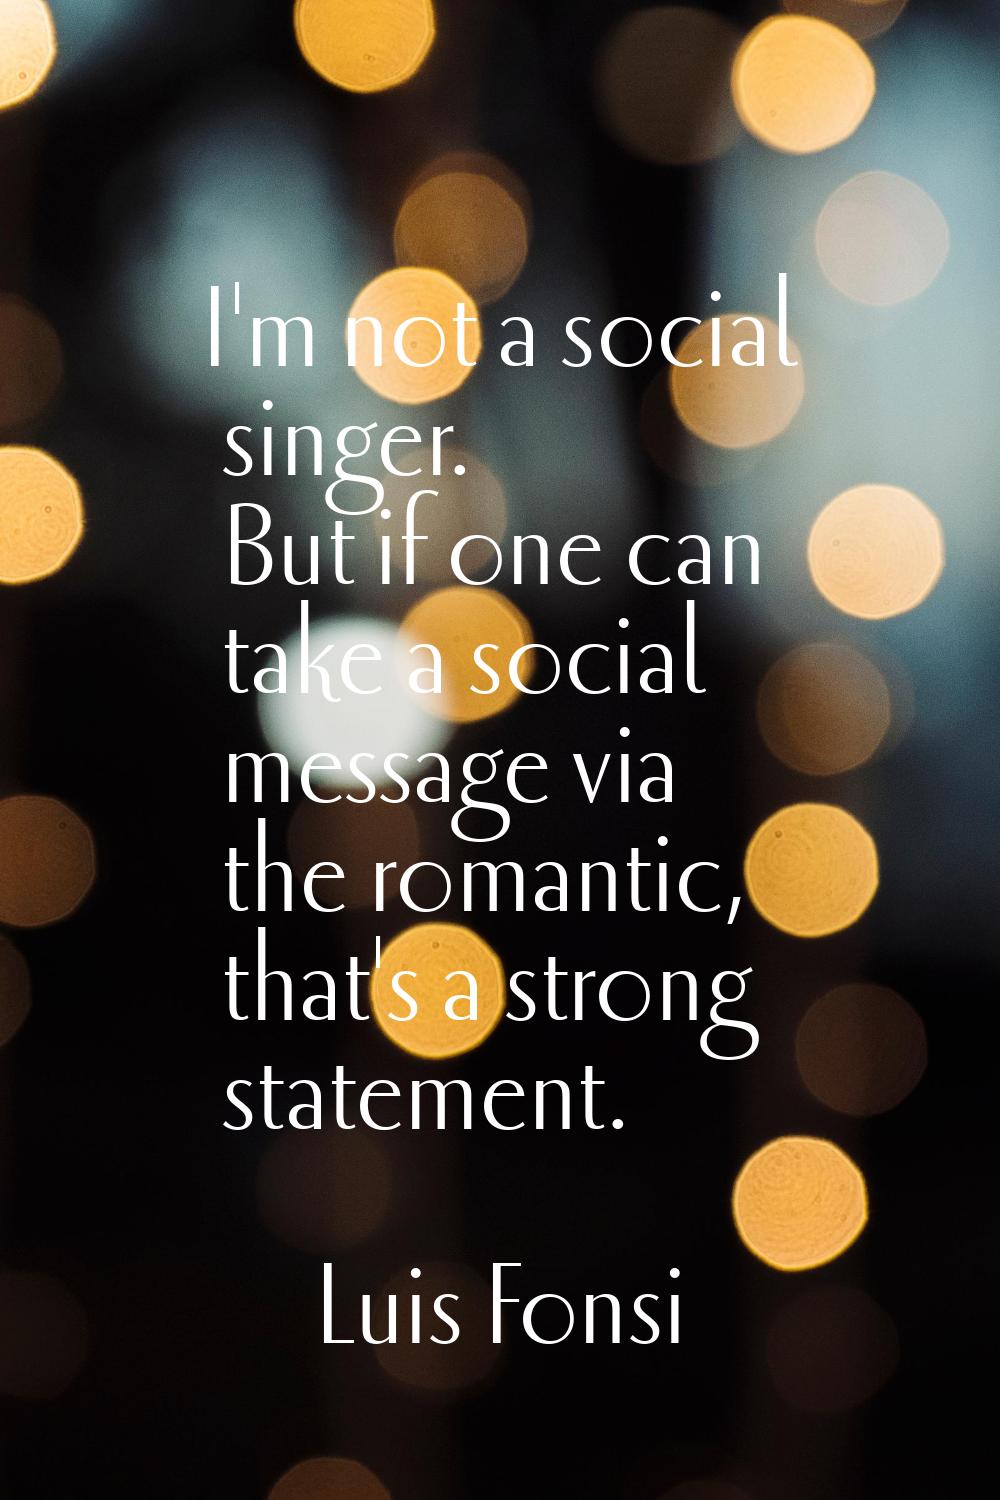 I'm not a social singer. But if one can take a social message via the romantic, that's a strong sta